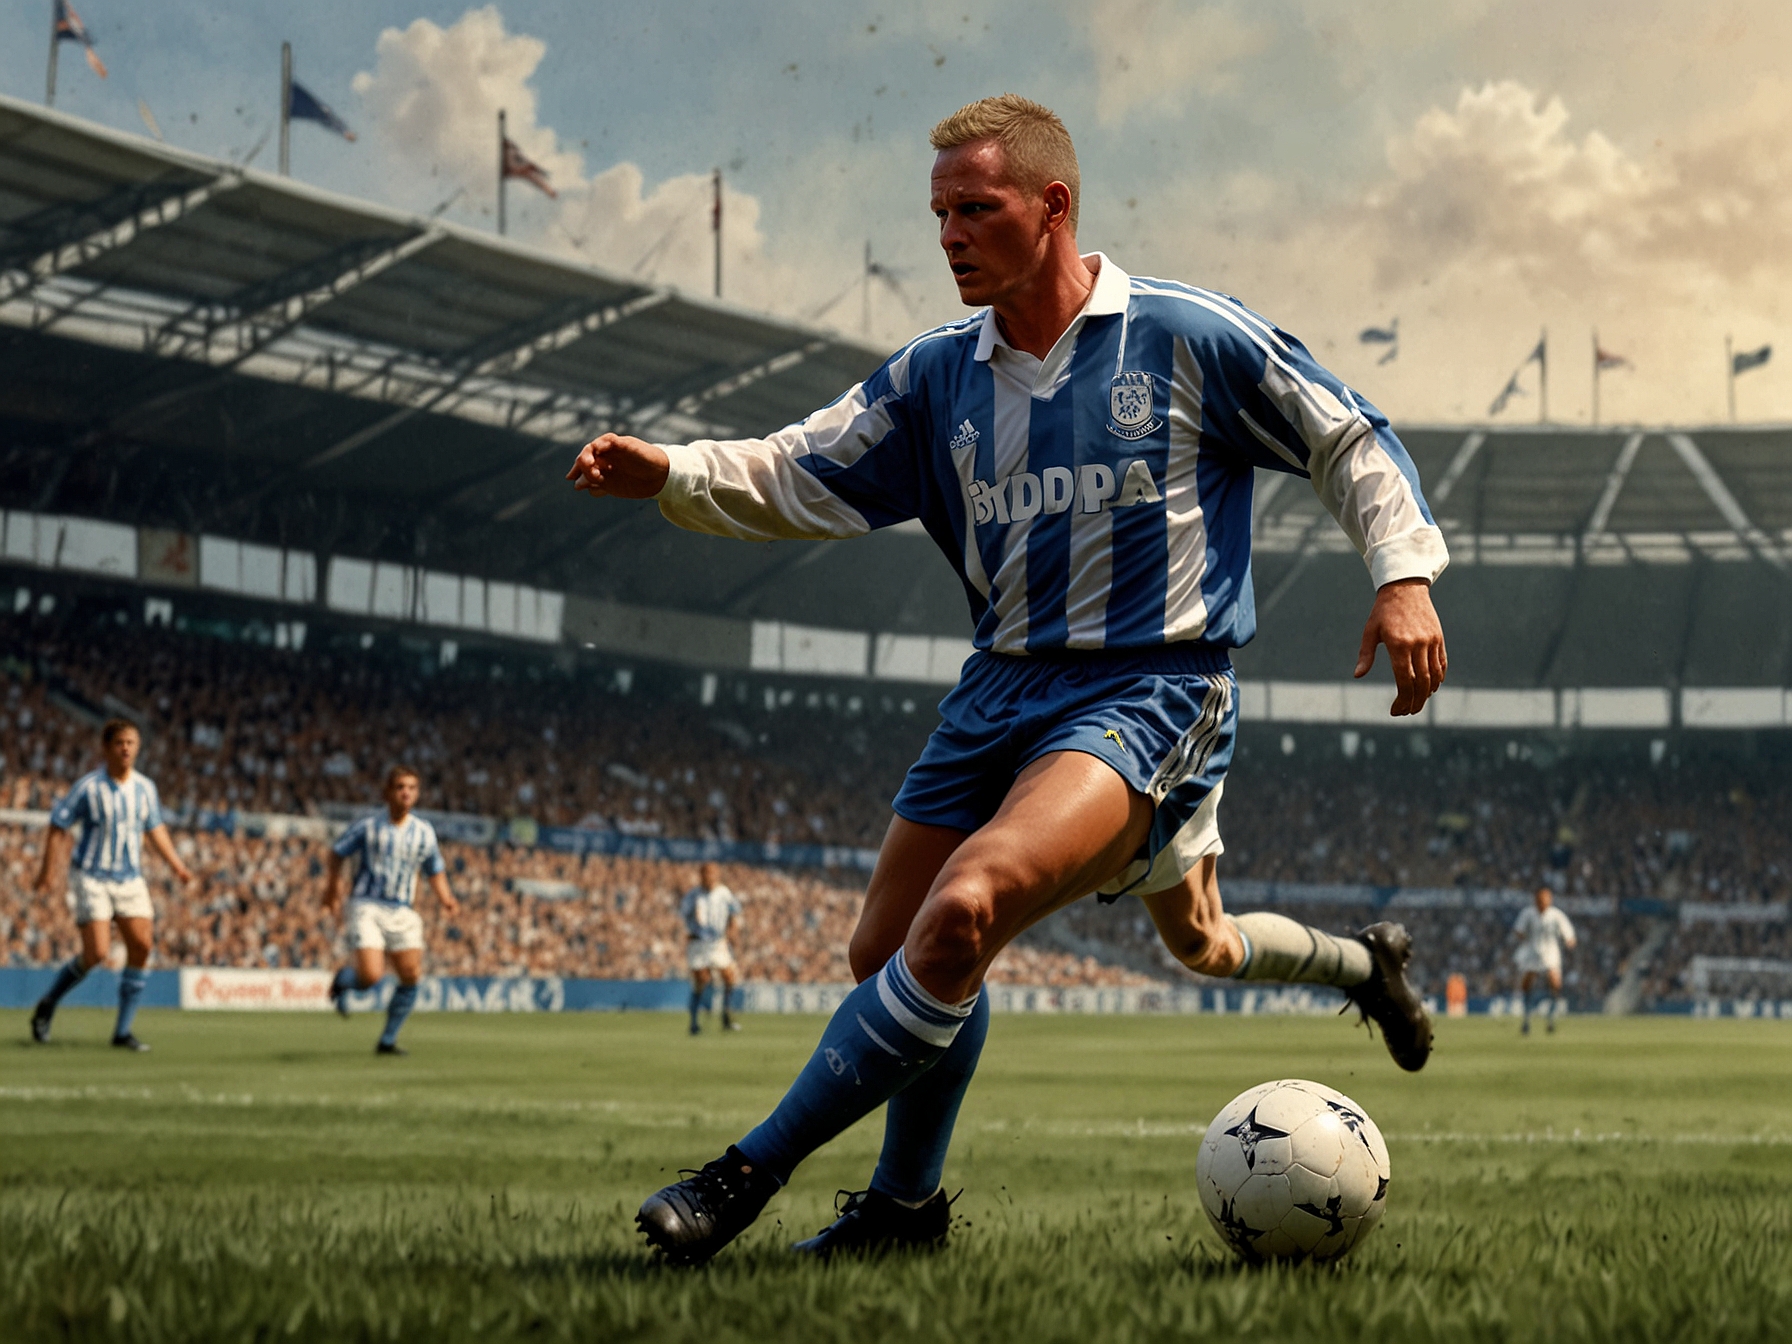 Paul Gascoigne during a match, showcasing his incredible skills on the field.